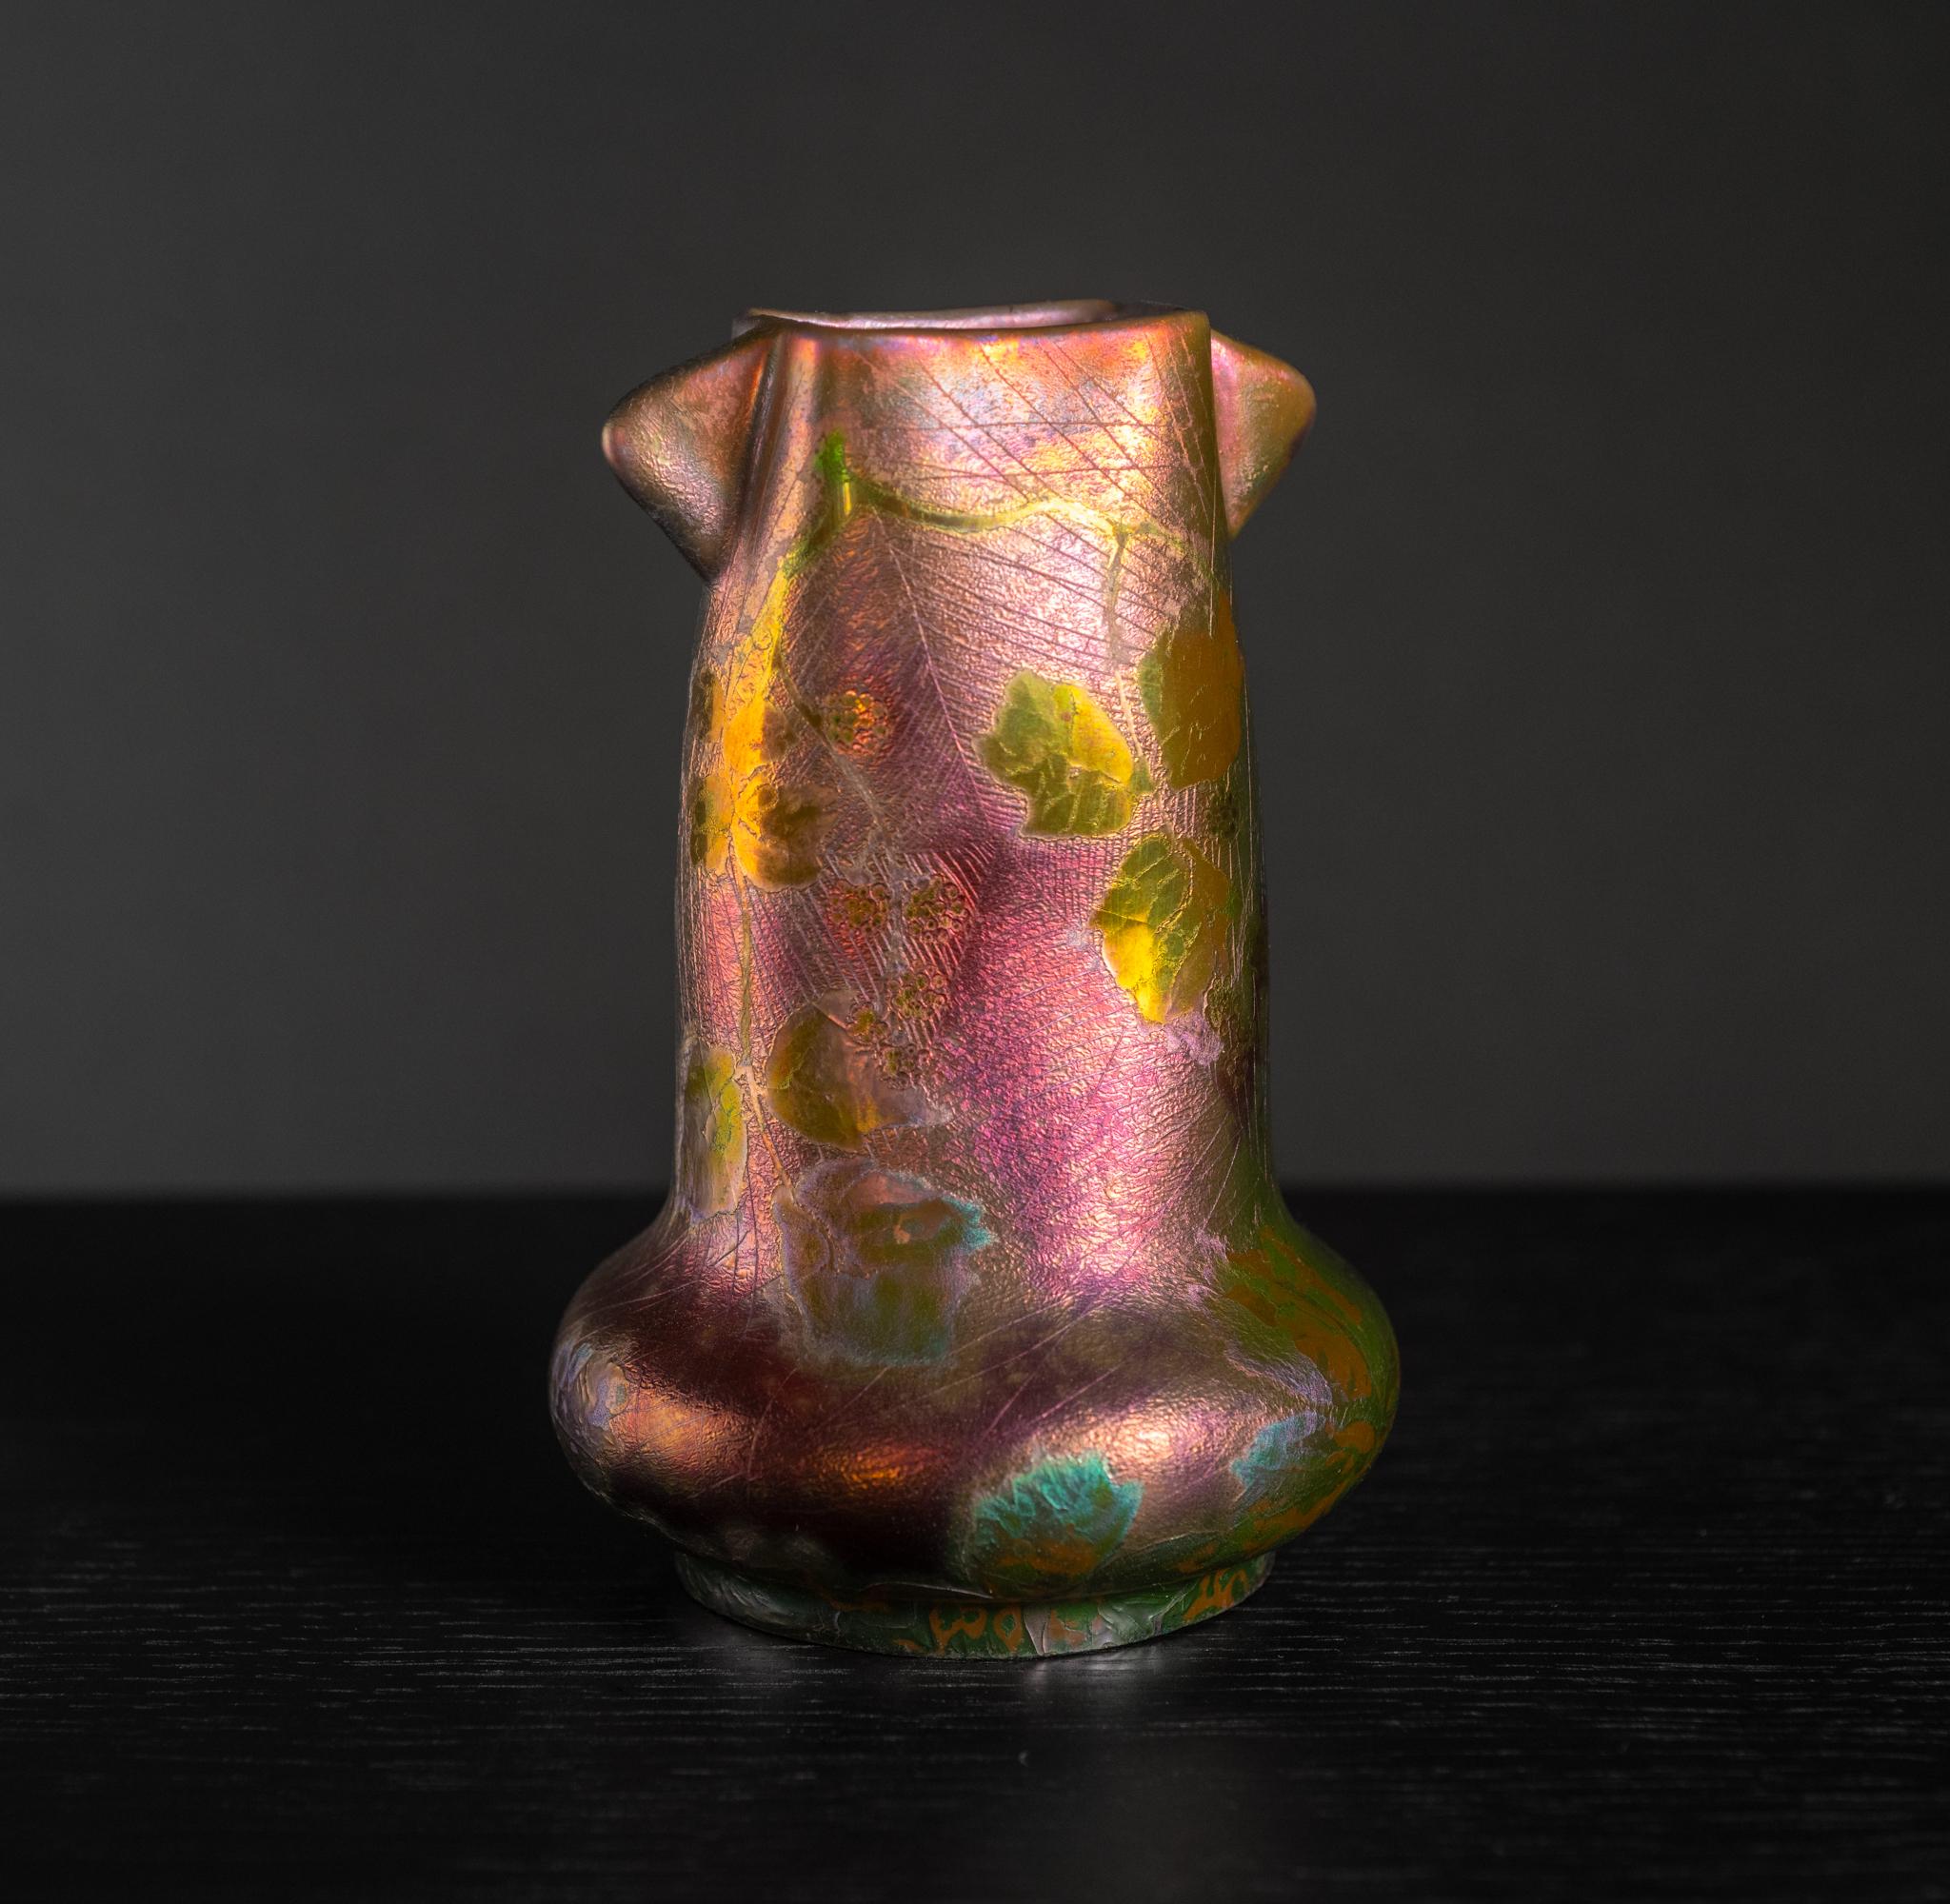 Attributed to Lucien Levy Dhurmer for Clement Massier.

An encounter with Massier’s luster-glazed ceramics is an embarkation on an acid-colored trip, the sort of exploration which inspires deep reflection and requires transparency. Clement Massier,